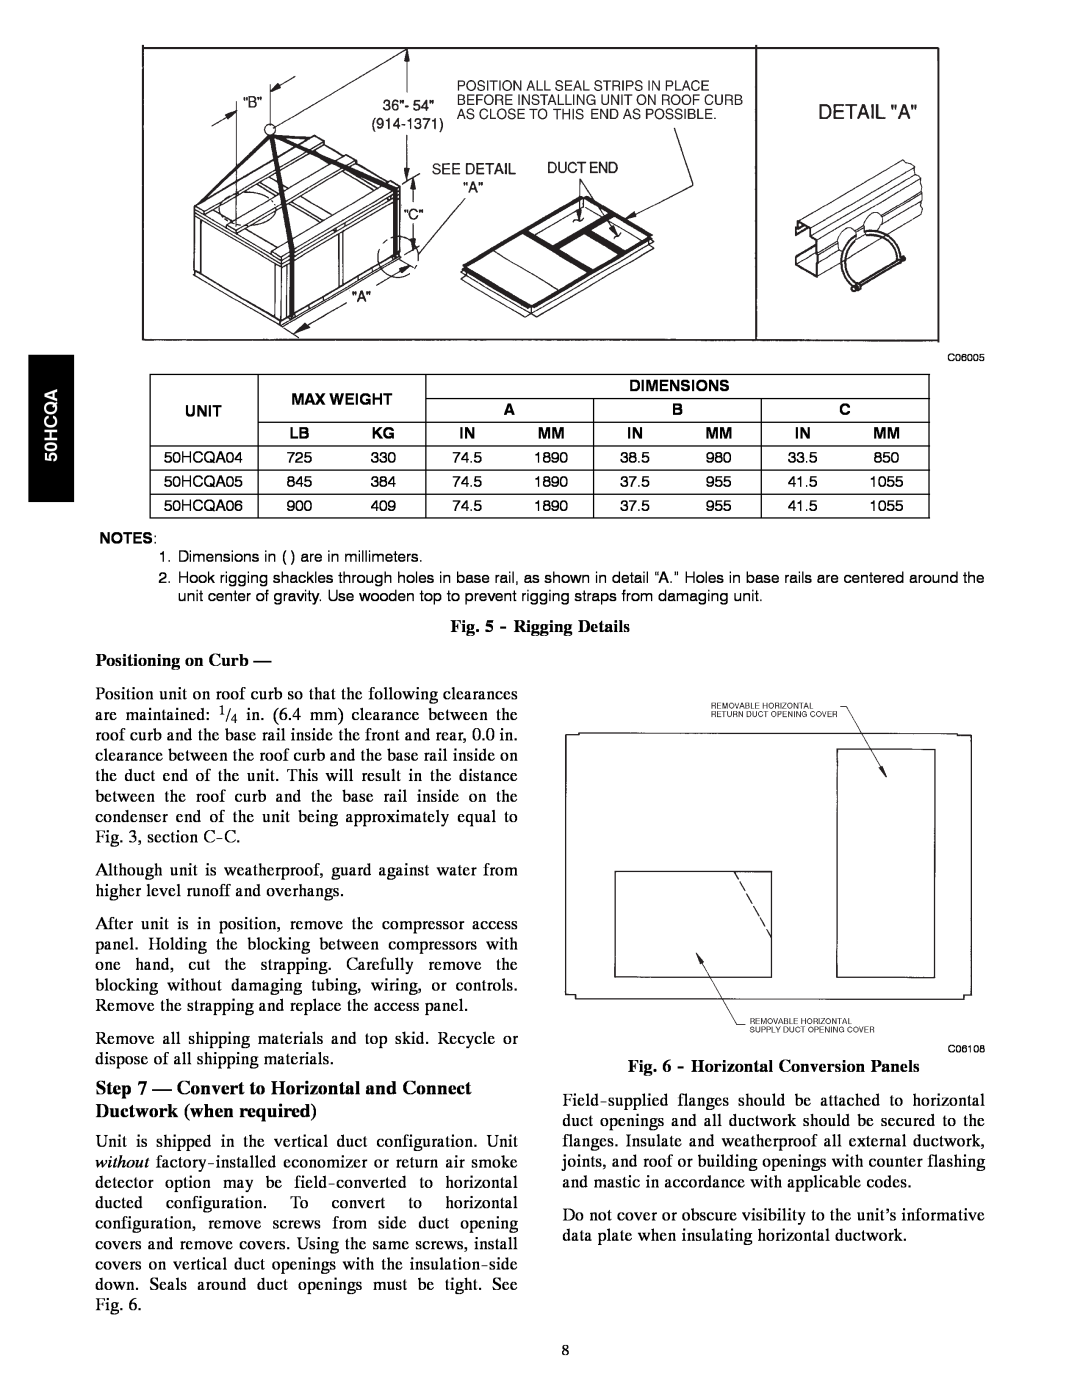 Carrier 50HCQA installation instructions Rigging Details Positioning on Curb, Horizontal Conversion Panels 